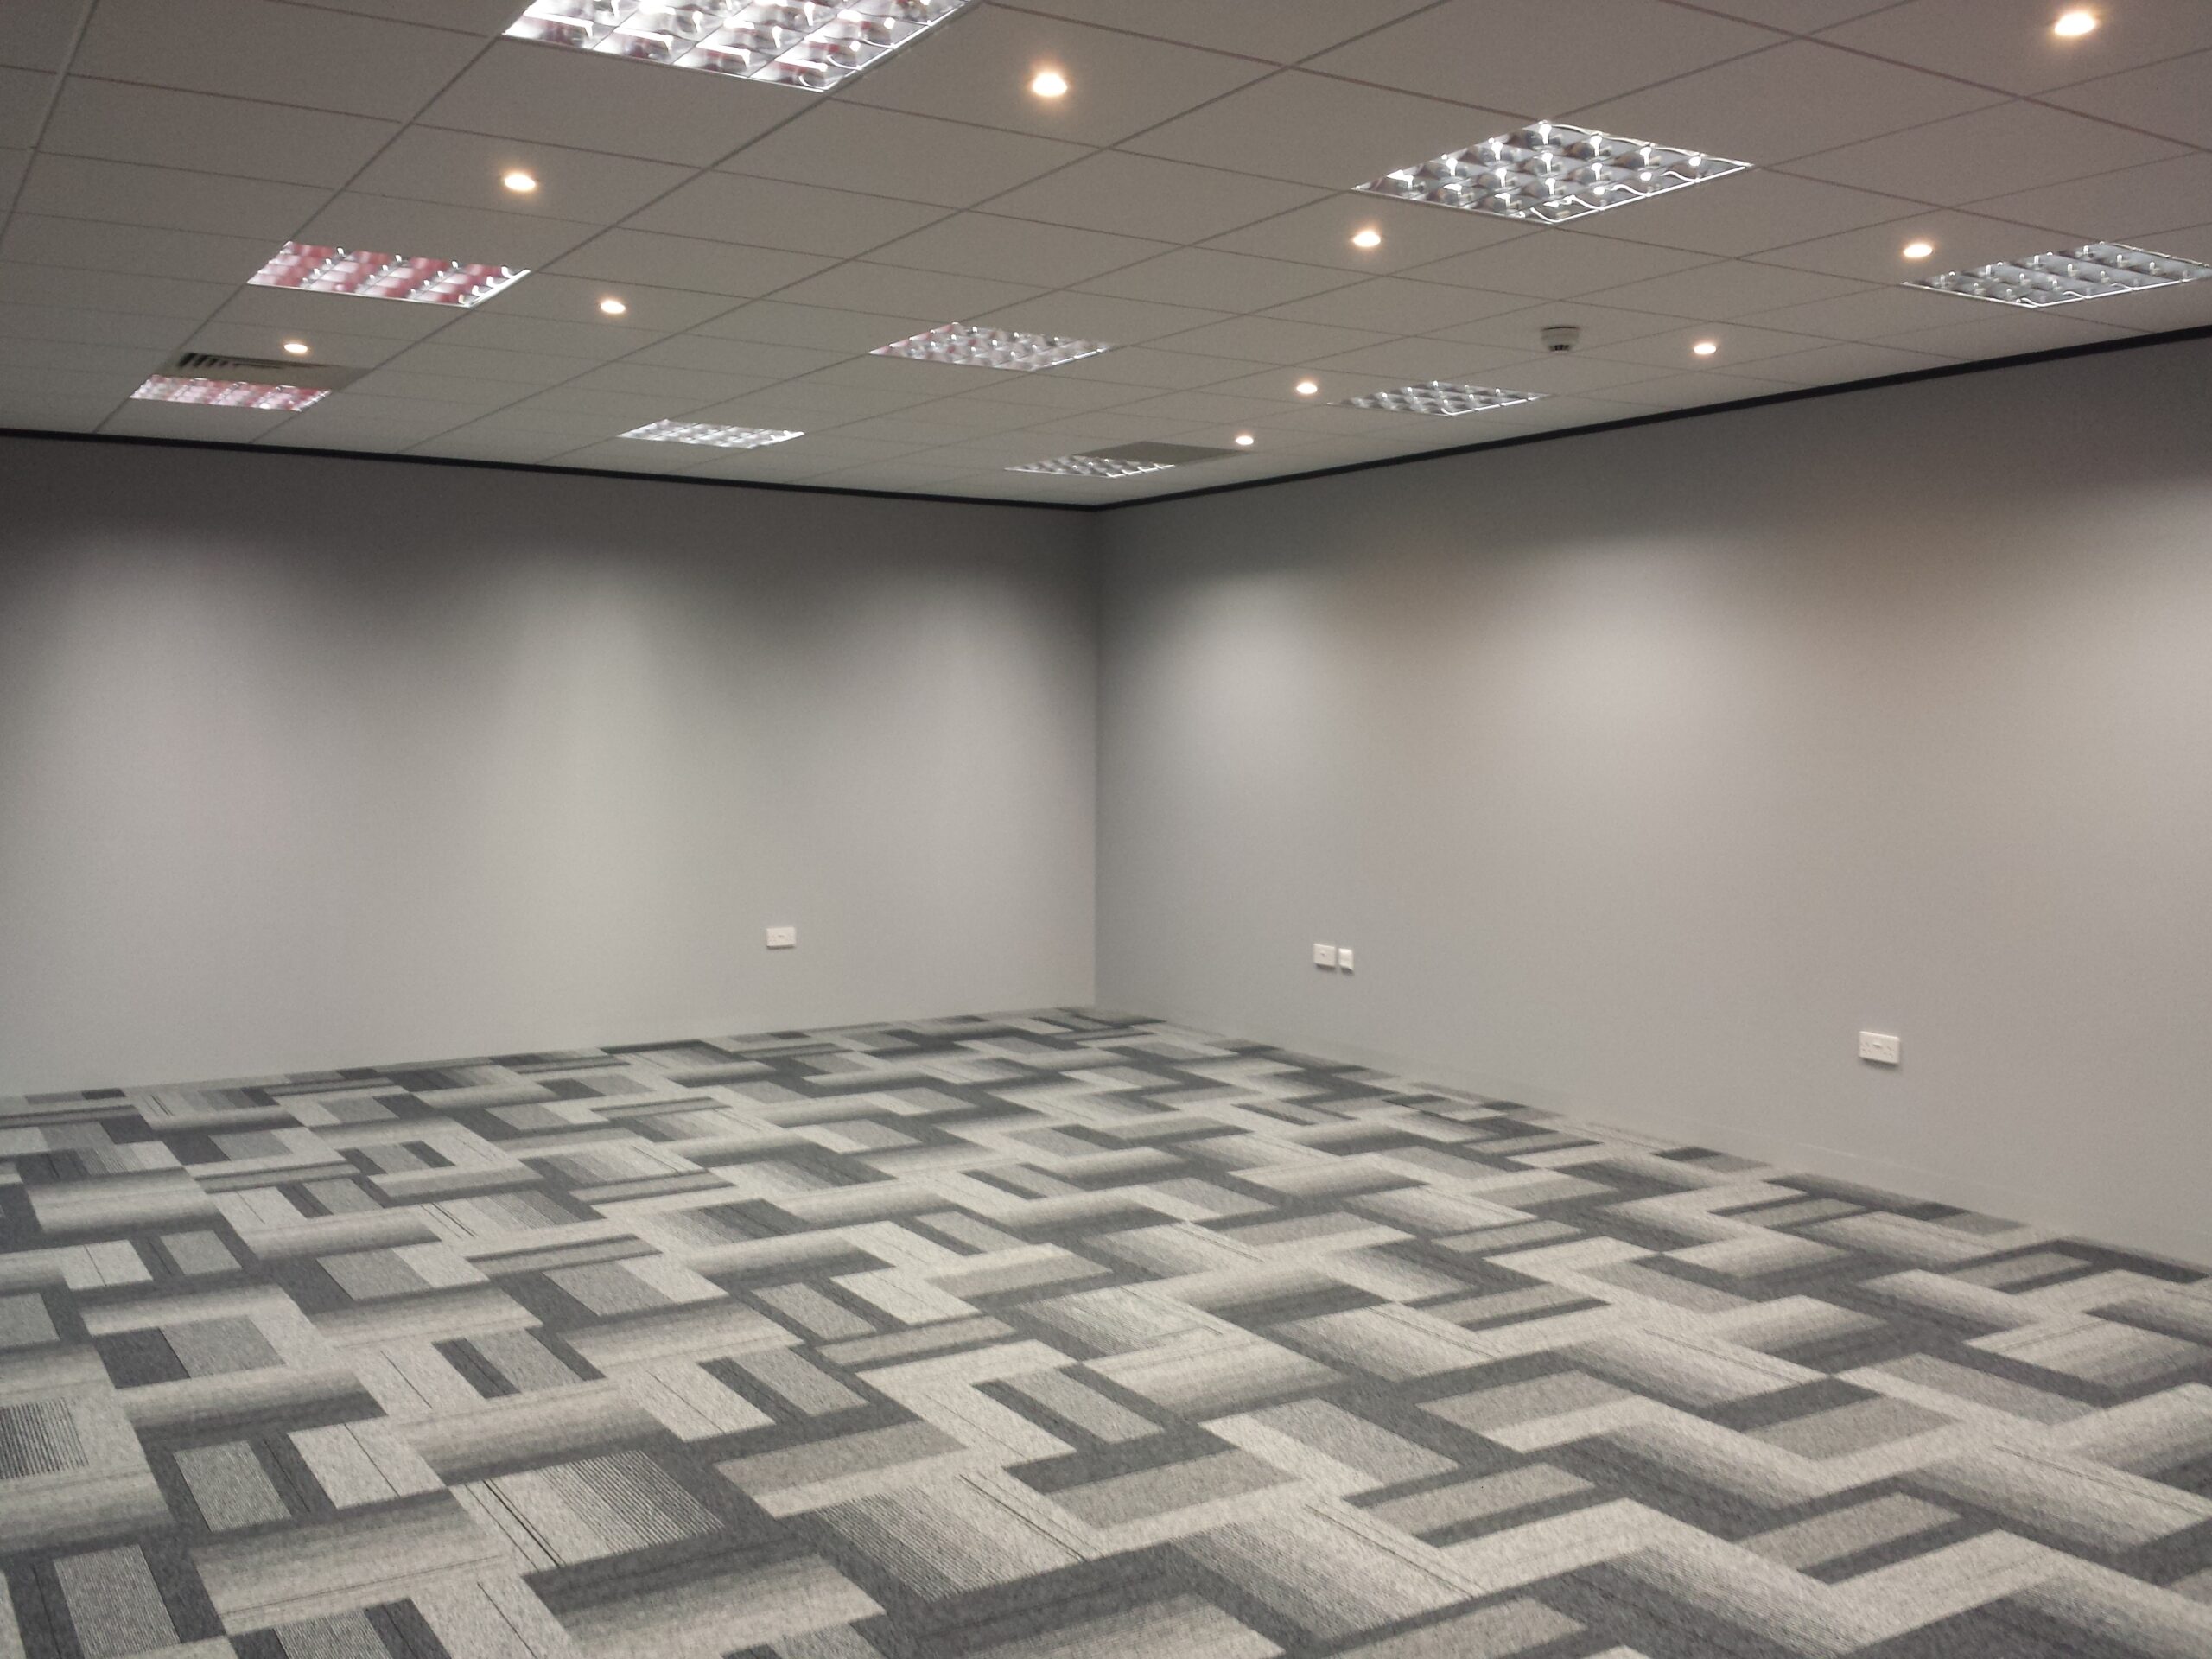 Commercial Office Carpet Tiles and Tiling Services in Birmingham